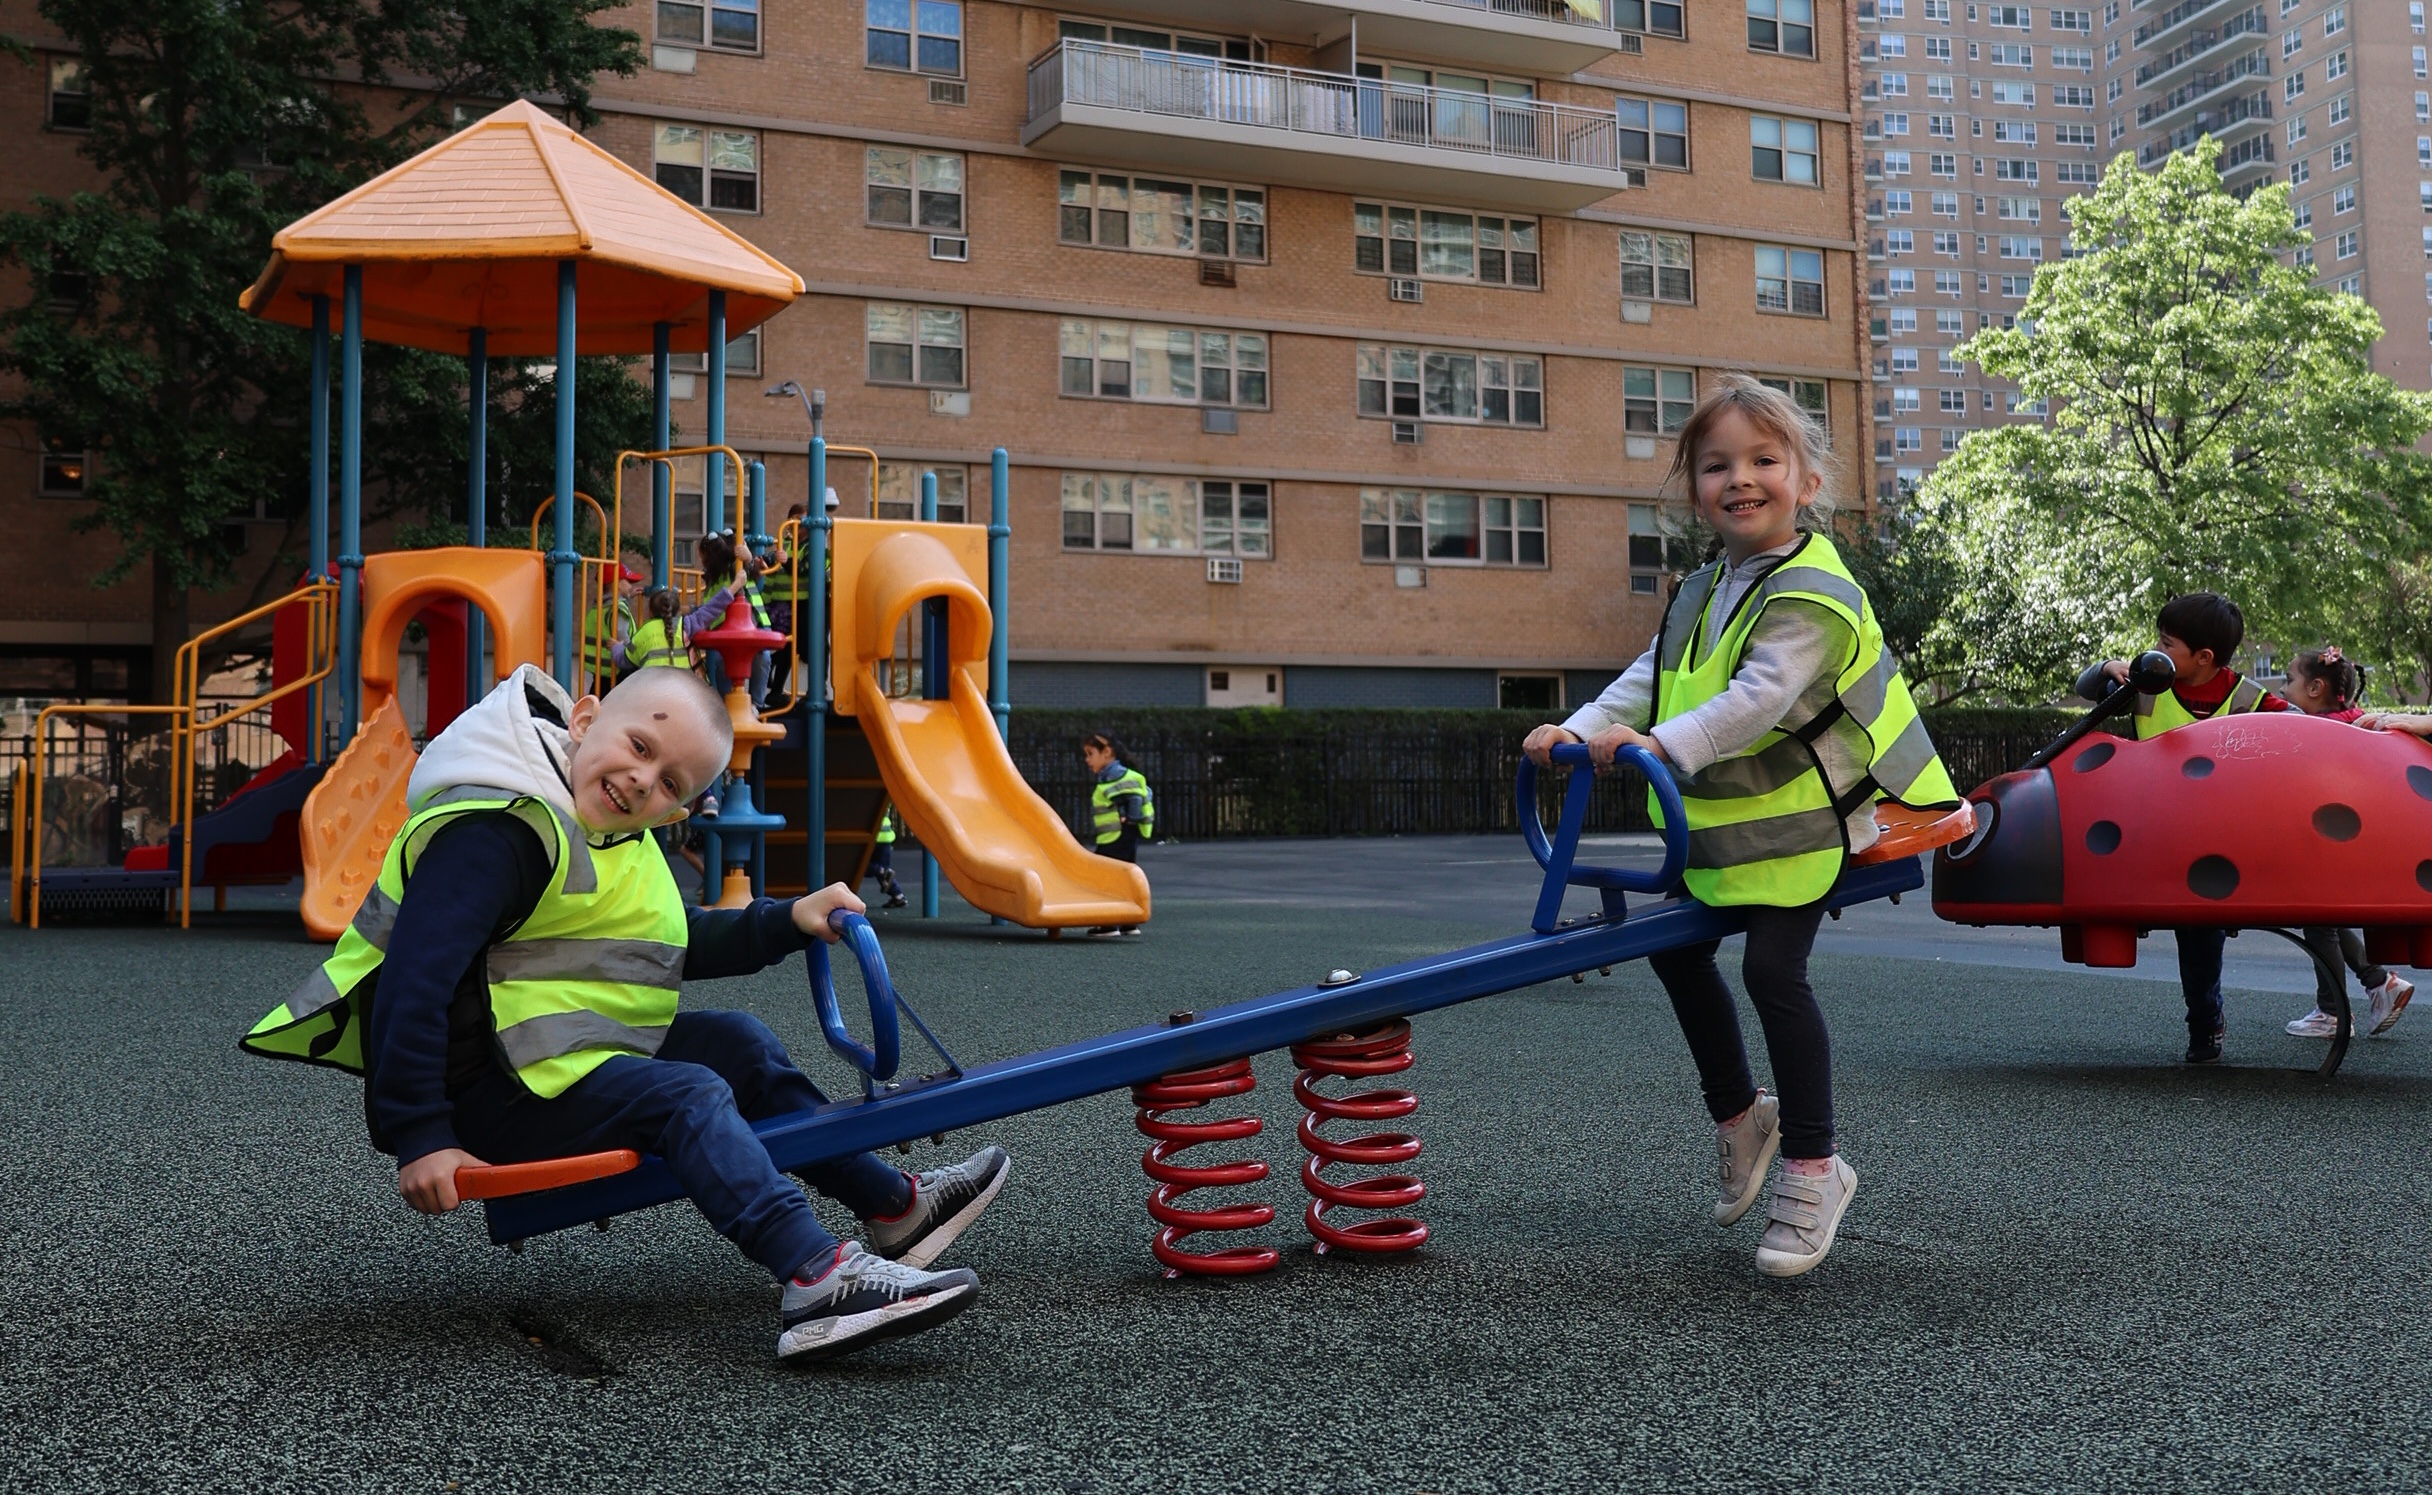 Two children wearing reflective safety vests playing on a seesaw in a playground with slides and climbing structures